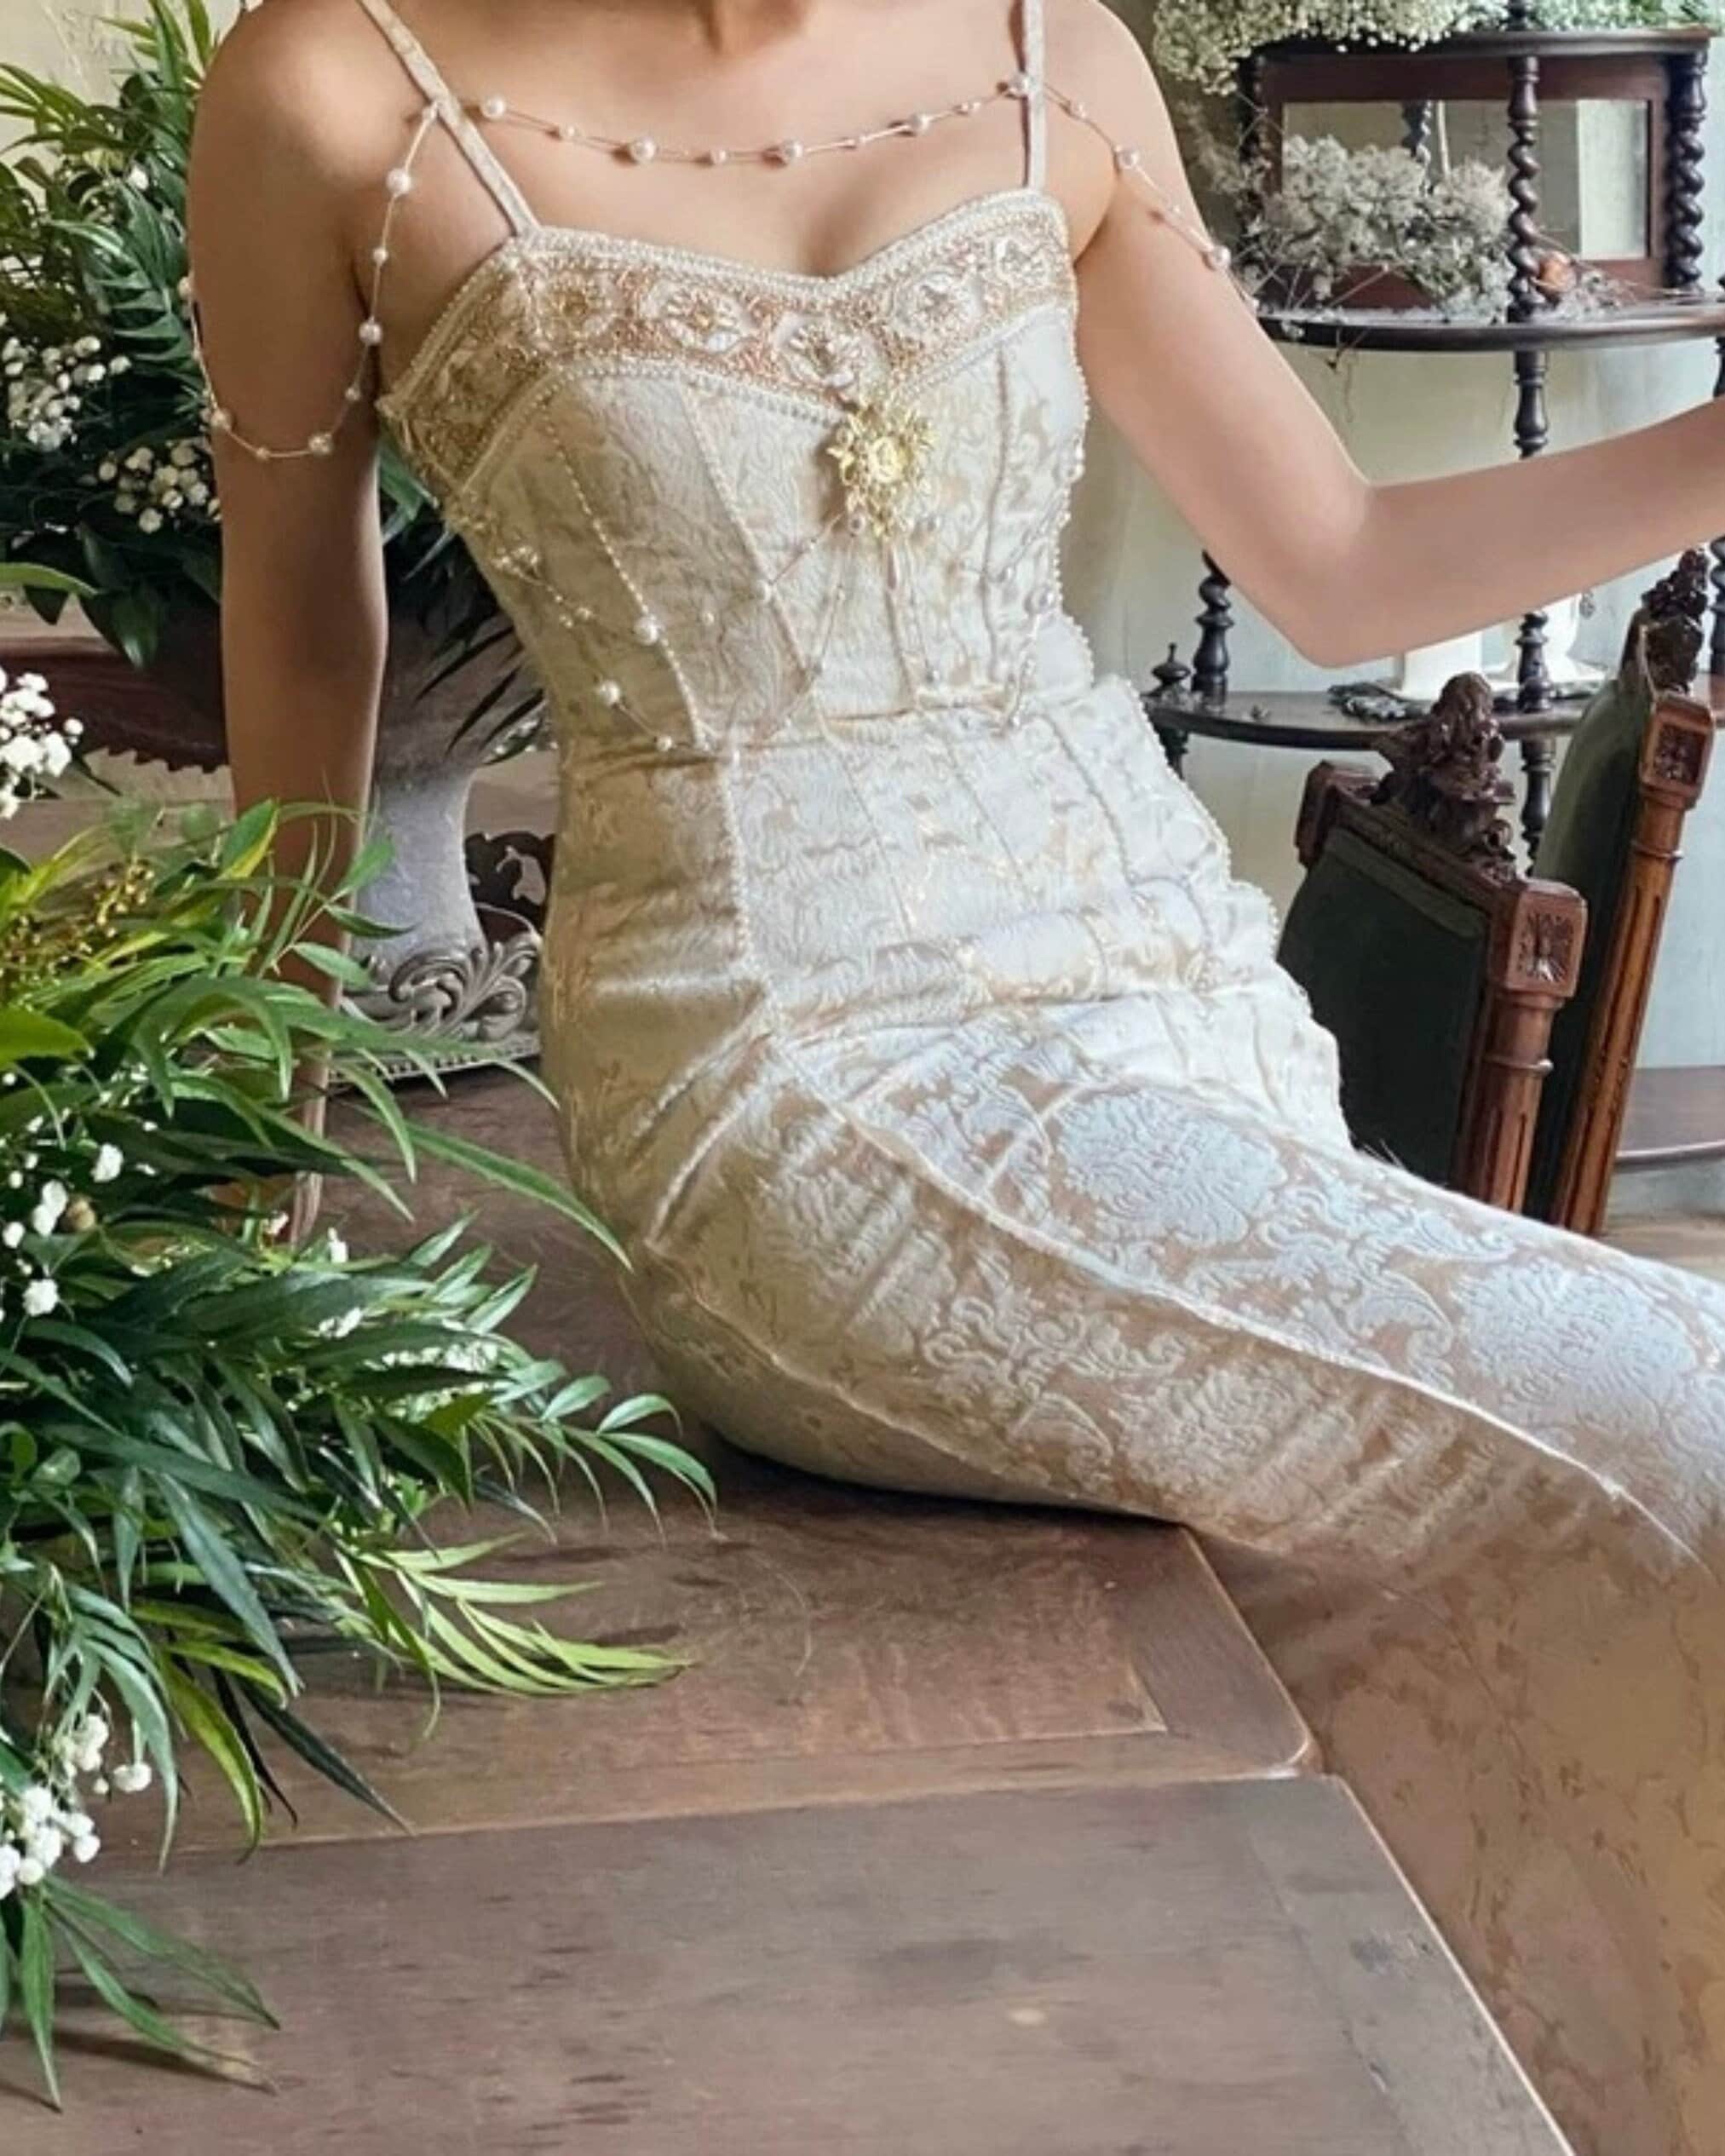 2023 Renaissance Inspired Wedding Dress, Long Sleeve Floral High Neck, Victorian  Gothic Style, Cream Bridal Gown From Bridalstore, $135.05